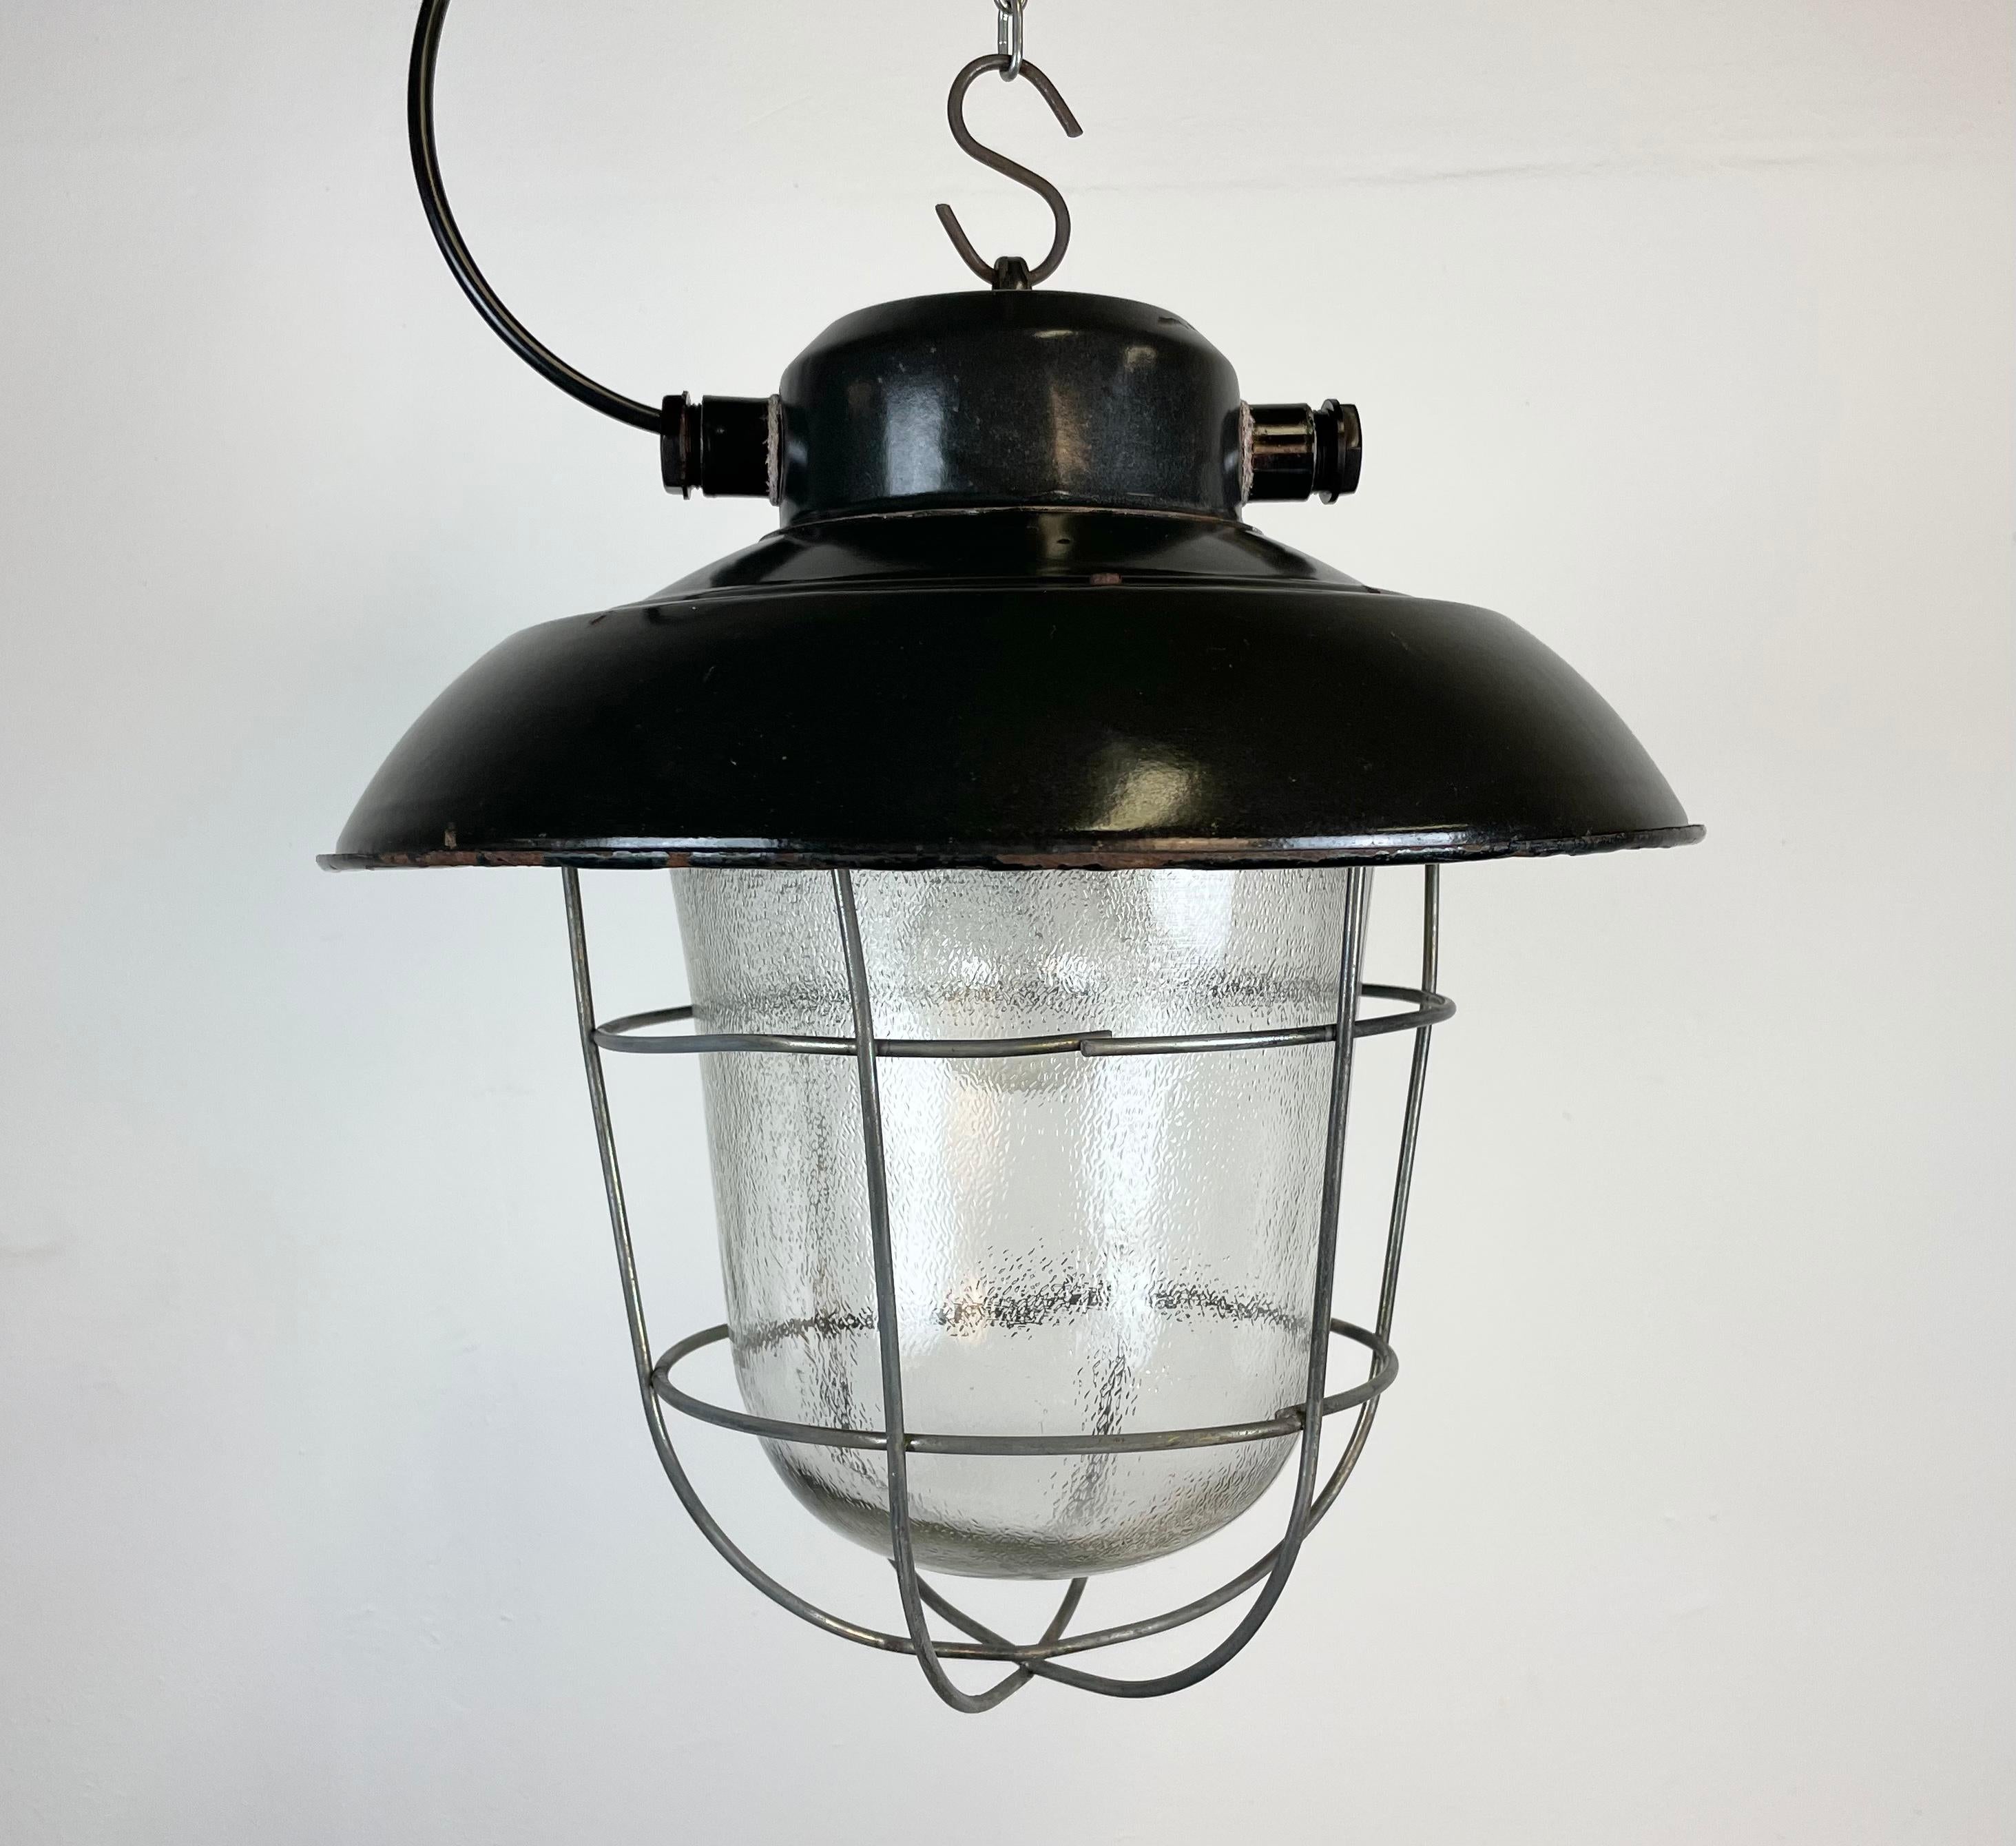 - Vintage industrial lamp made by Elektrosvit in former Czechoslovakia during the 1960s
- Black enamel shade with white interior.
- Frosted glass, Iron grid.
- Porcelain socket requires E 27 lightbulbs.
- New wire.
- Weight: 4 kg.
- Fully